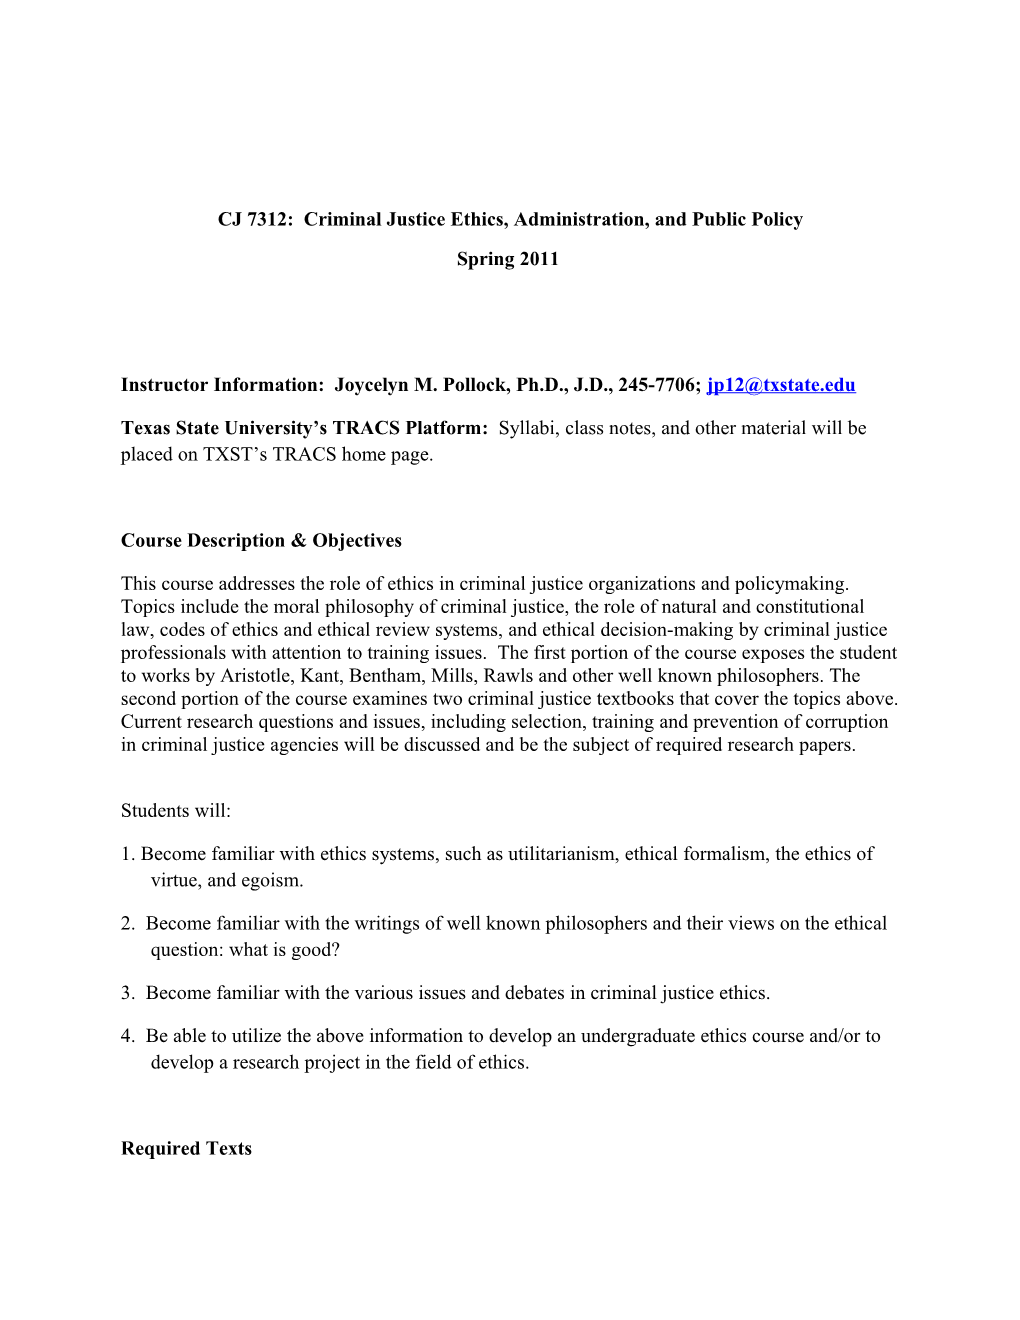 CJ 7312: Criminal Justice Ethics, Administration, and Public Policy